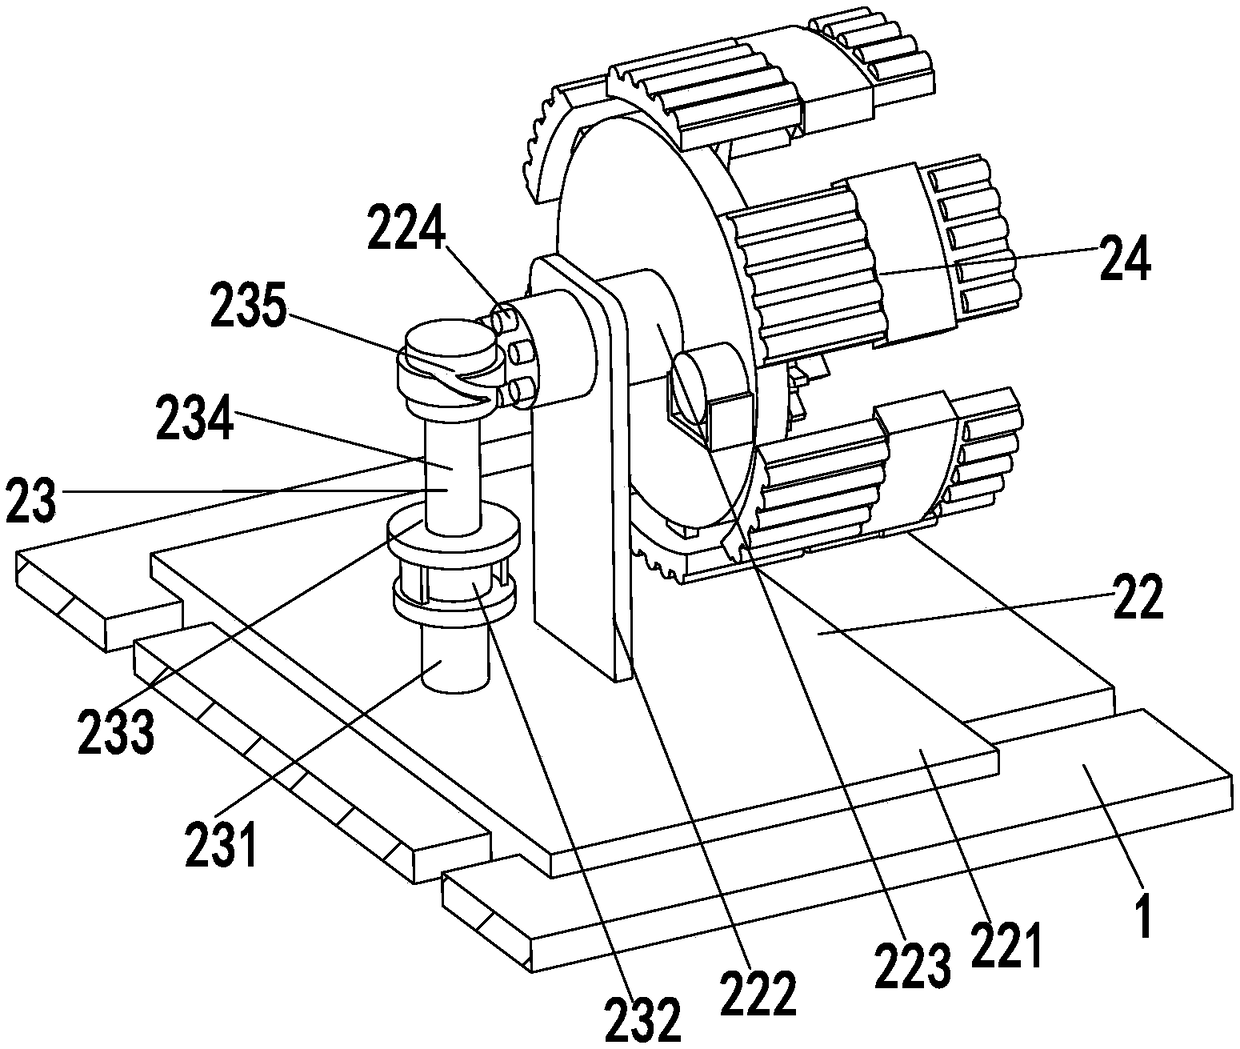 Fixture for machining of numerical control electric spark machine tool